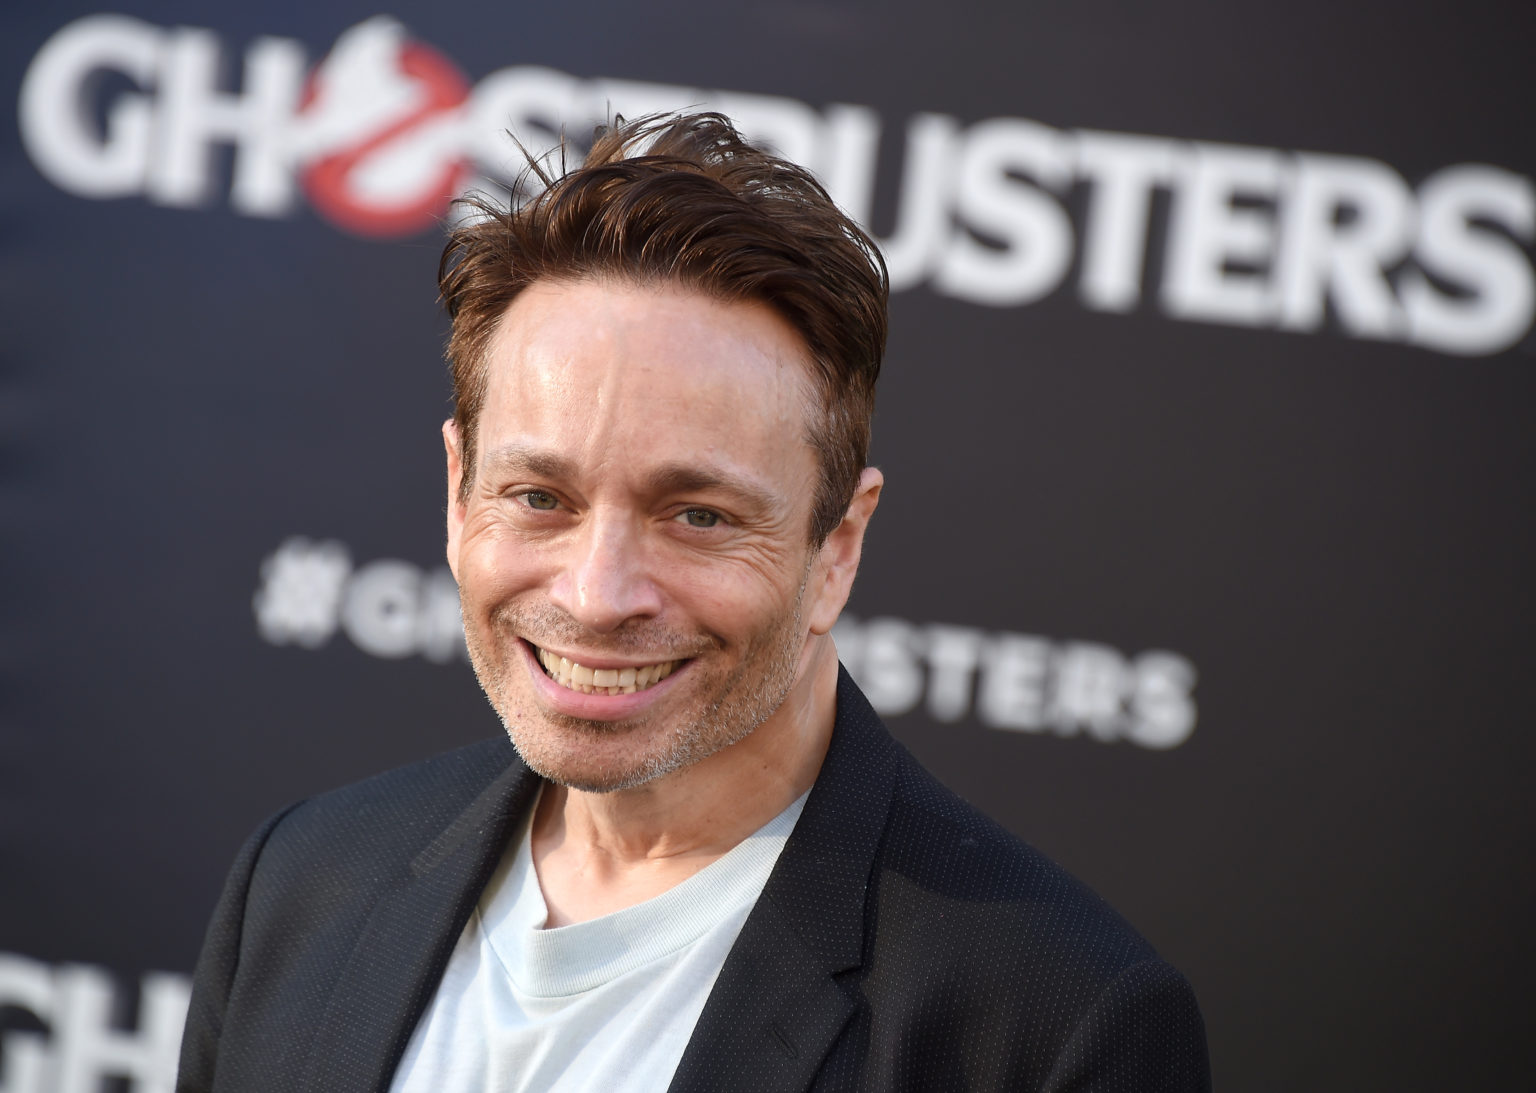 Chris Kattan's height means he's not the shortest person in the CBB house